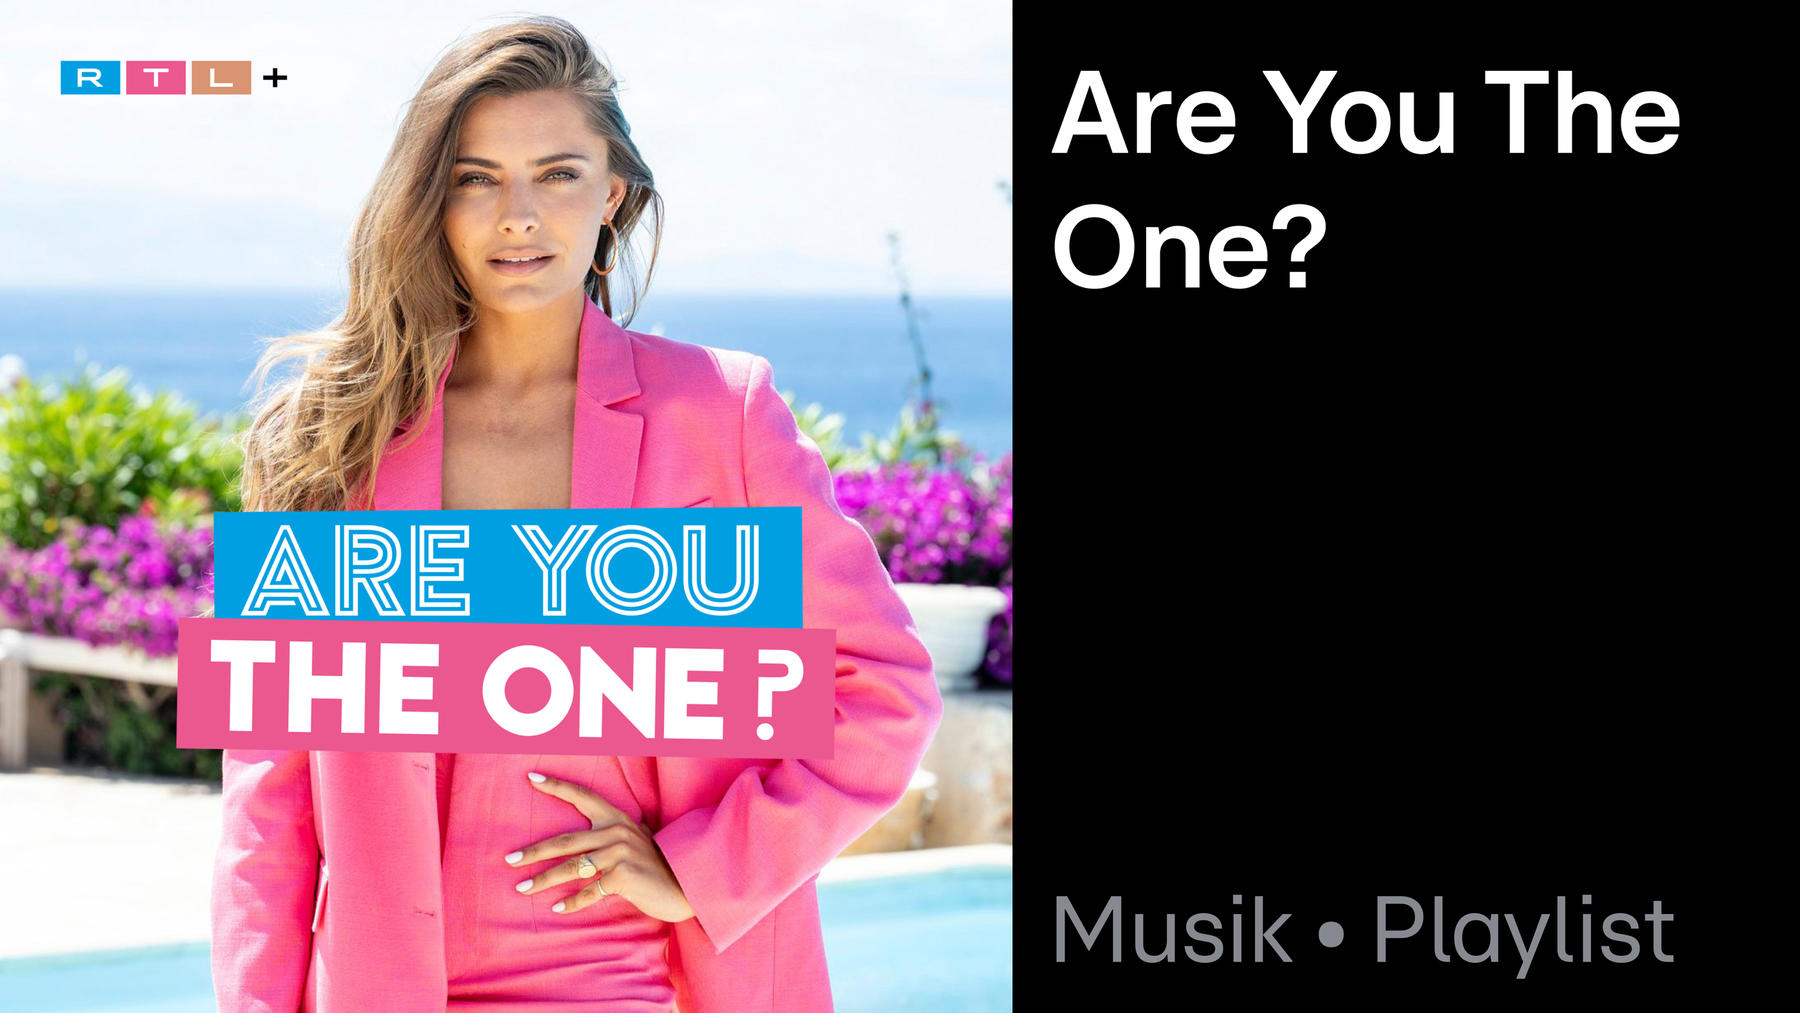 Playlist: Are you the one?